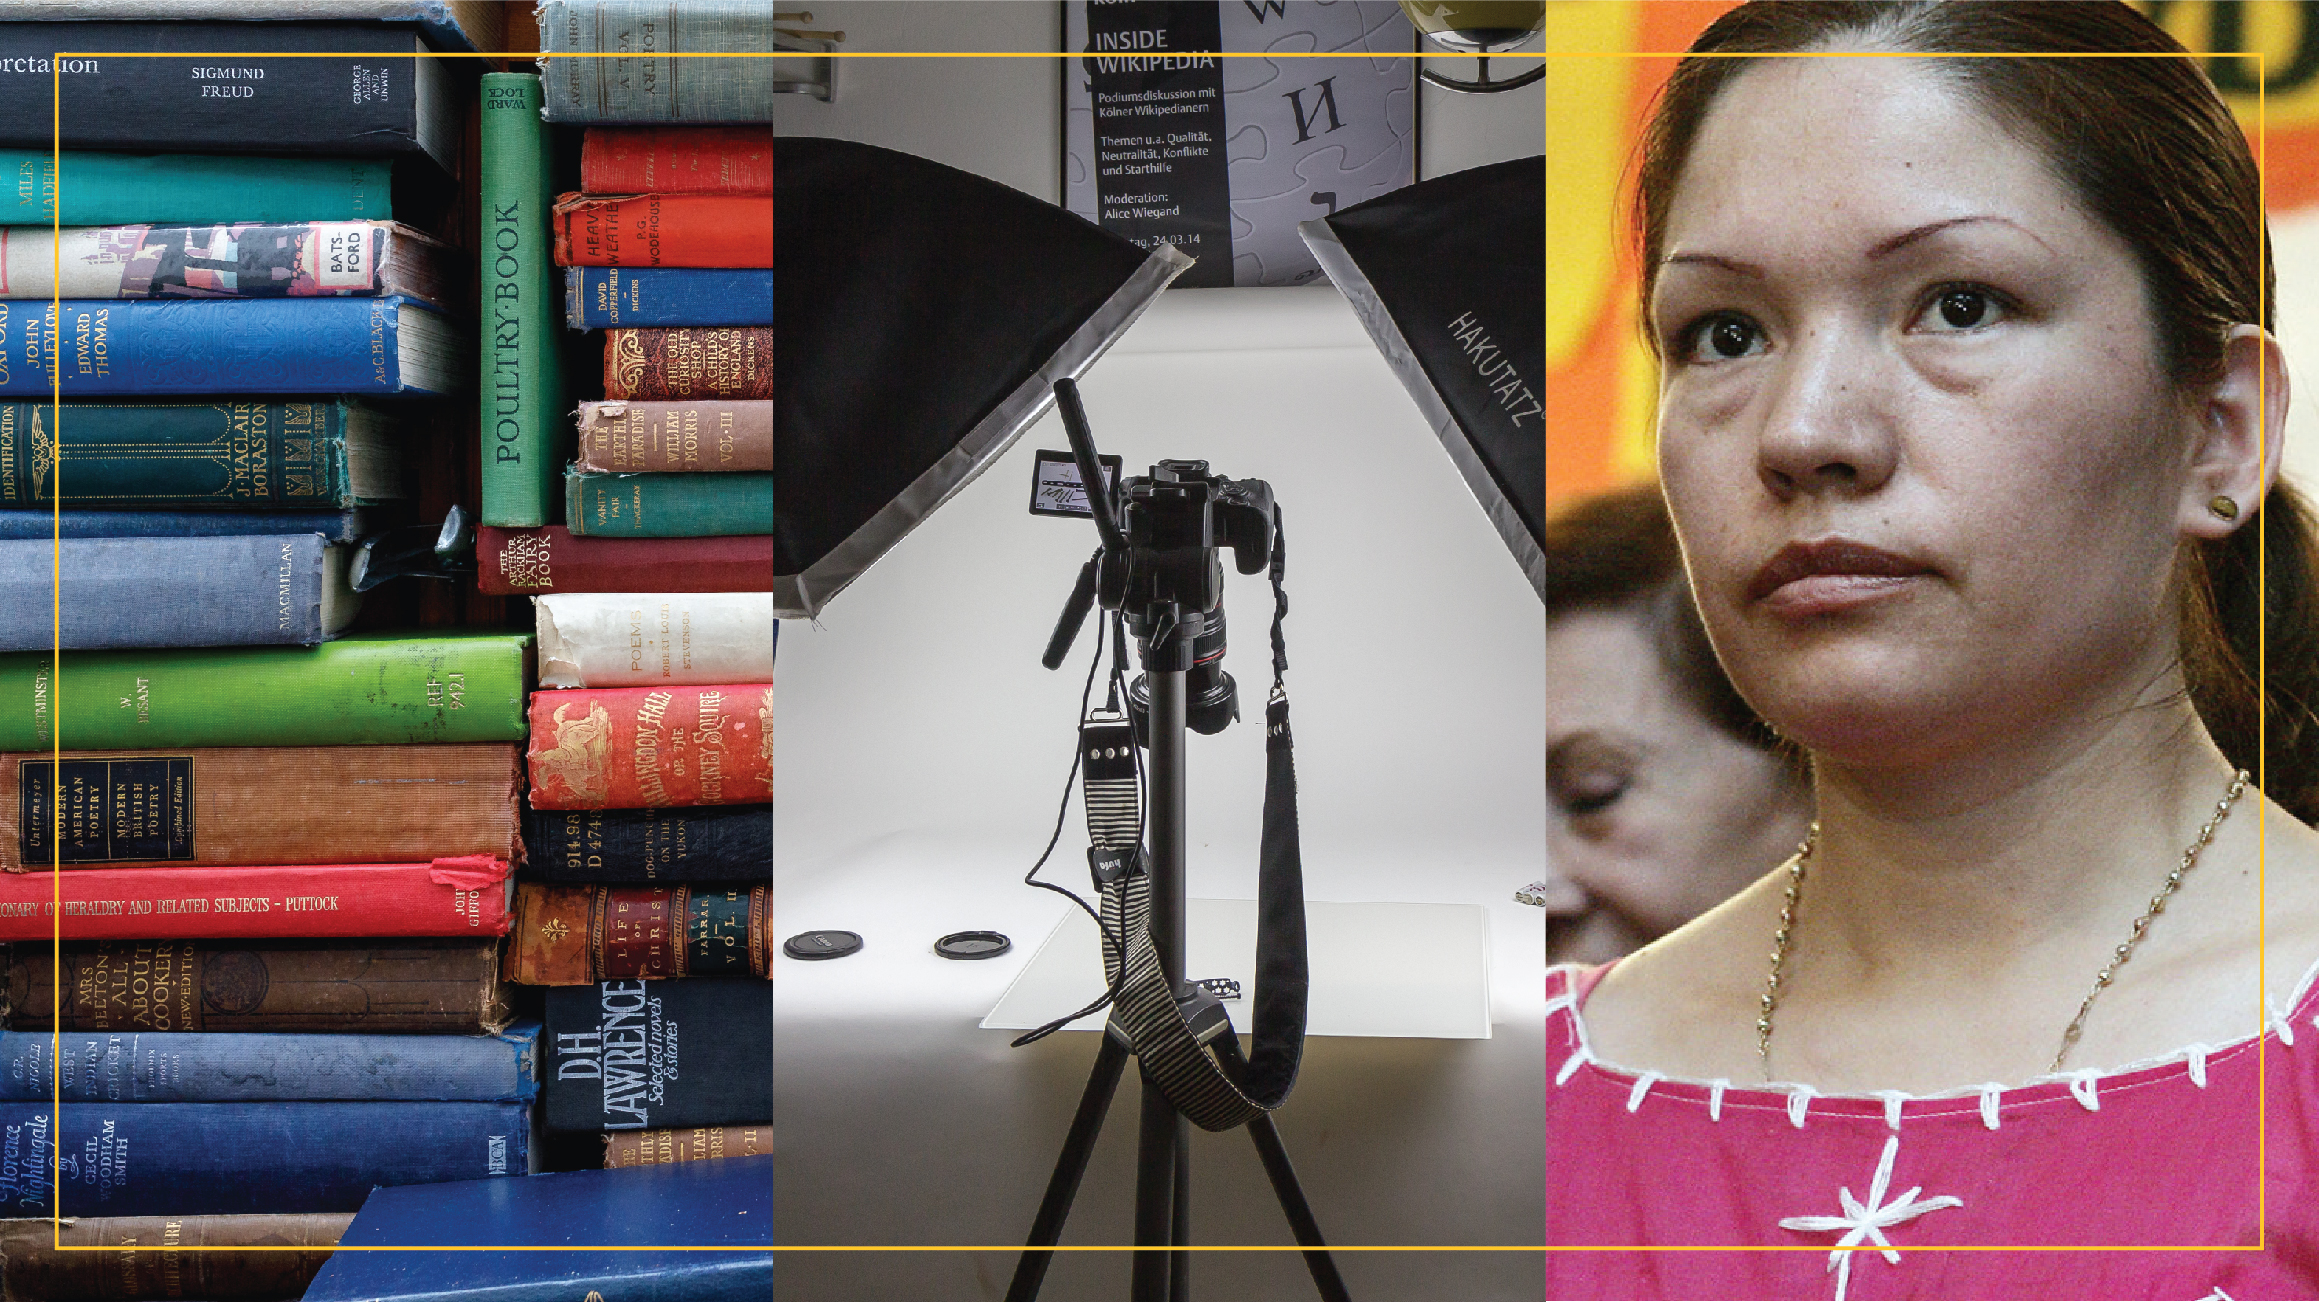 collage of stack of colorful books, image of video camera set up to film, activist Elvira Arellano